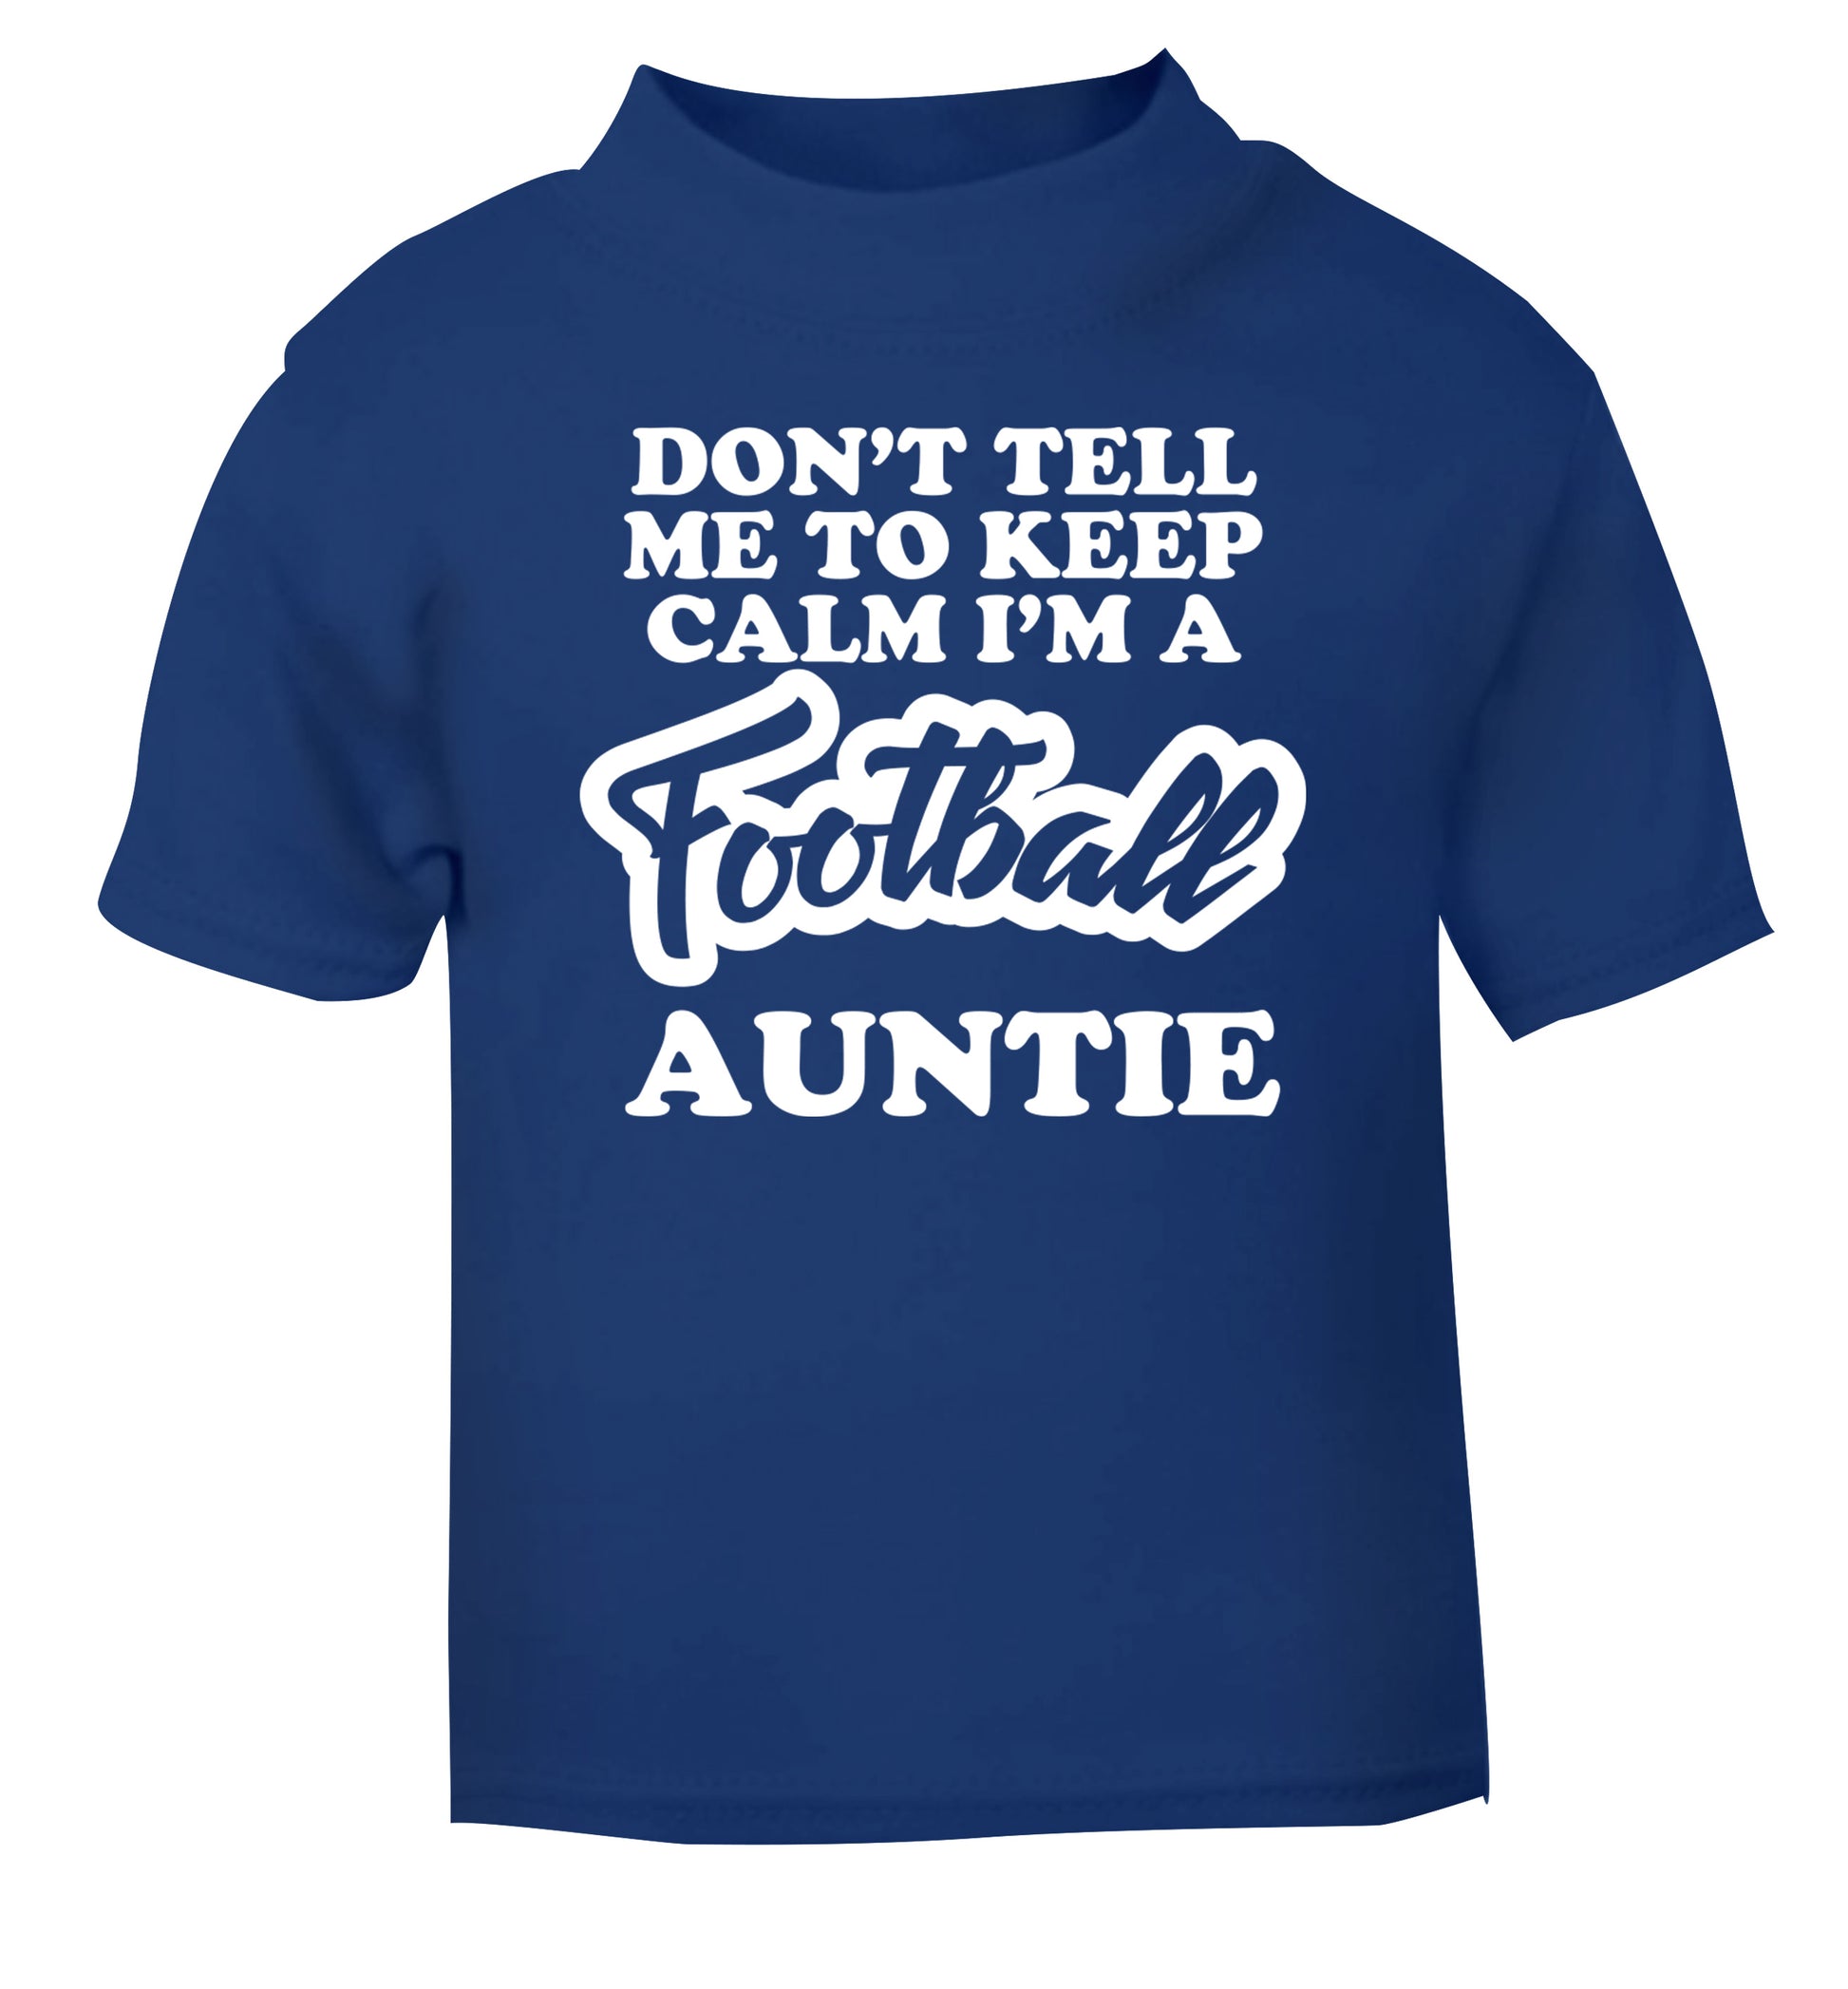 Don't tell me to keep calm I'm a football auntie blue Baby Toddler Tshirt 2 Years